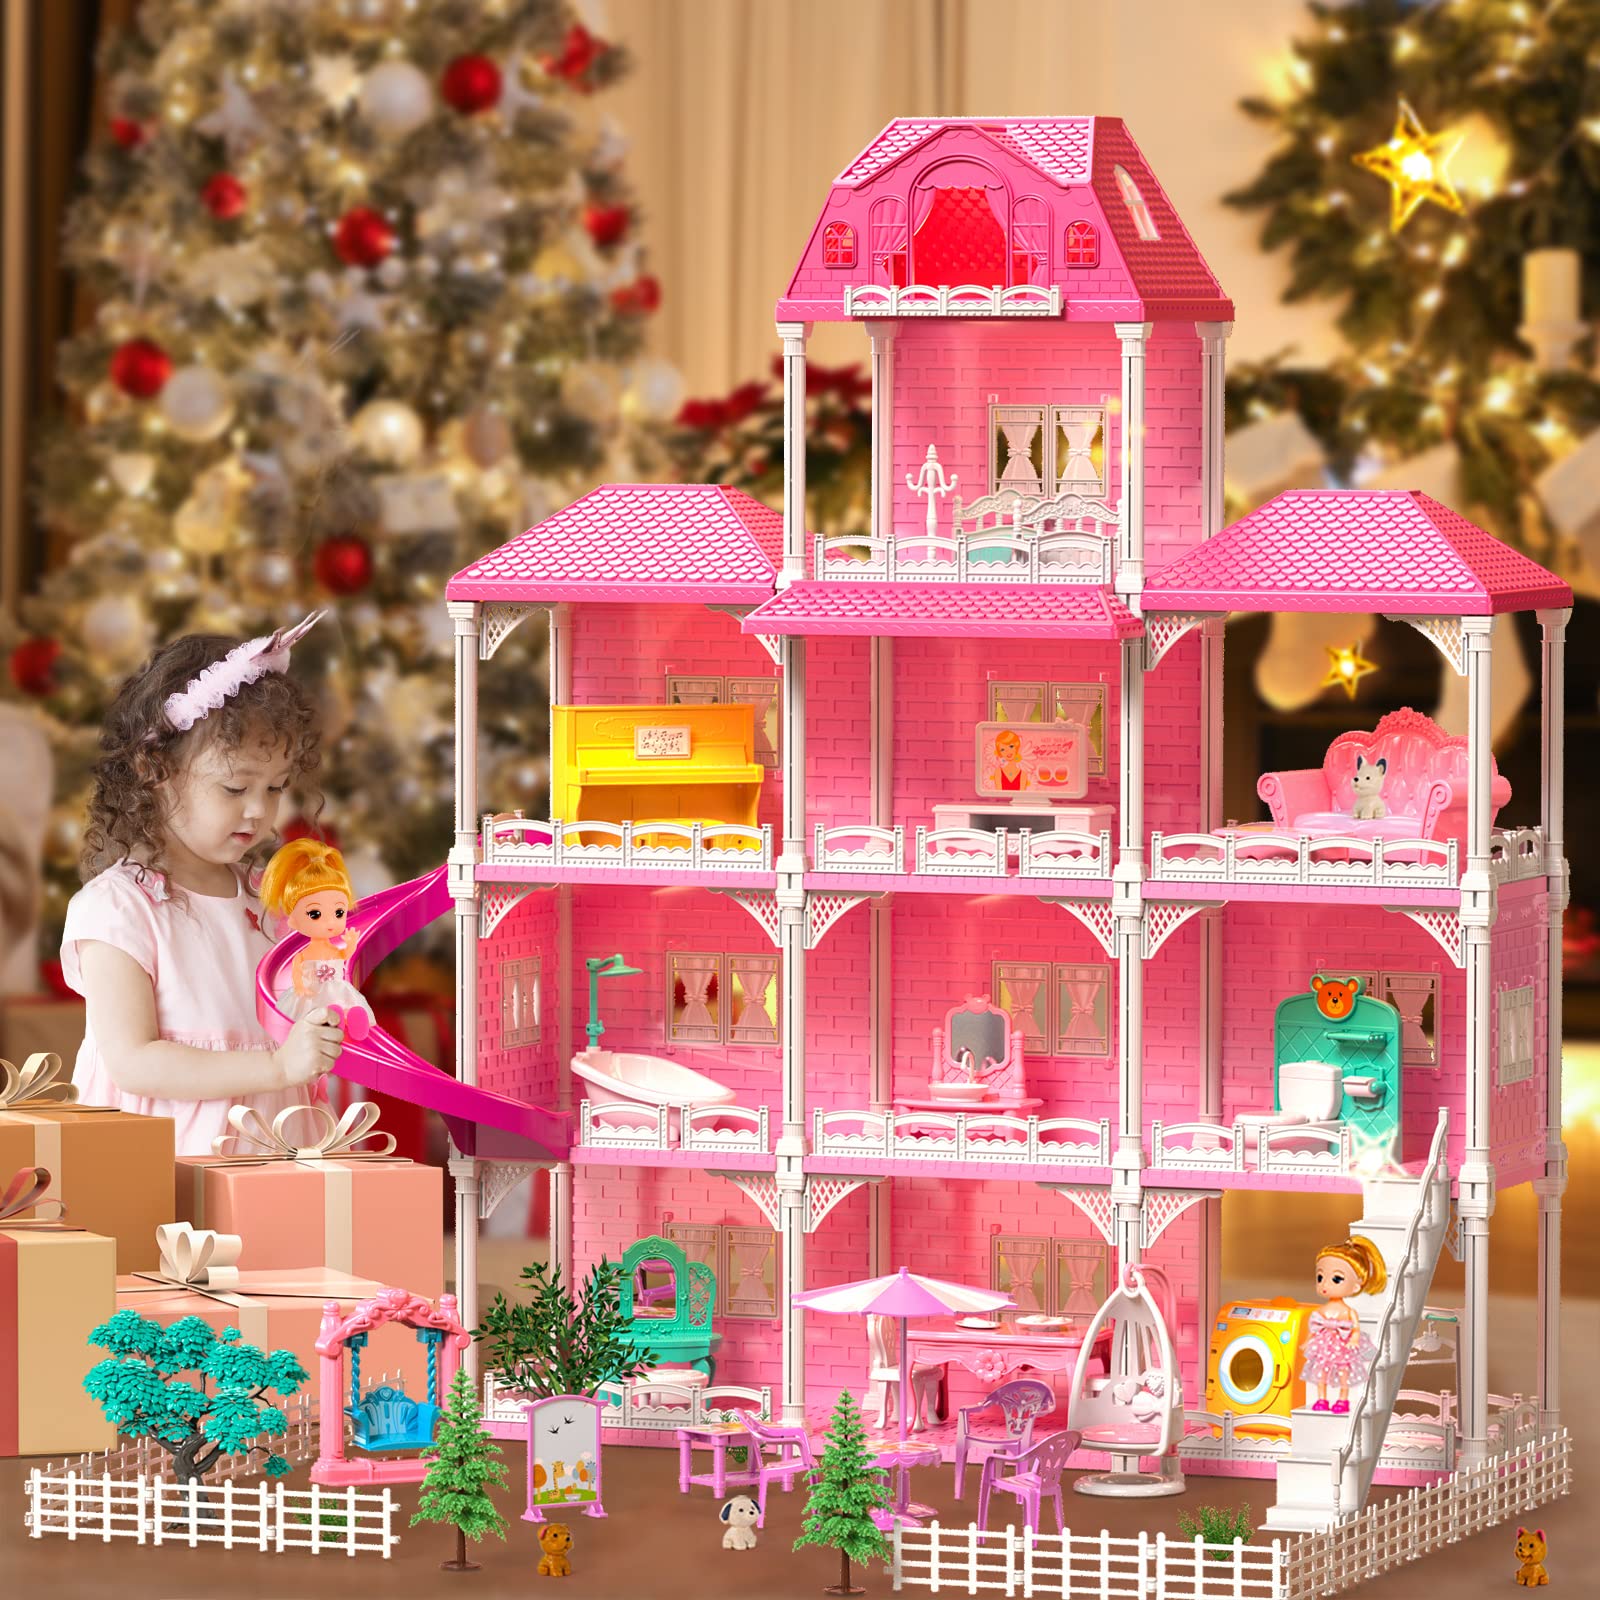 TEMI Dreamhouse Doll House for 3 4 5 6 7 8 Year Old Girls Toy - 4-Story 10 Rooms Dollhouse 7-8 with 2 Toy Figures, Furniture and Accessories, Pretend Play House for Kid Ages 3+